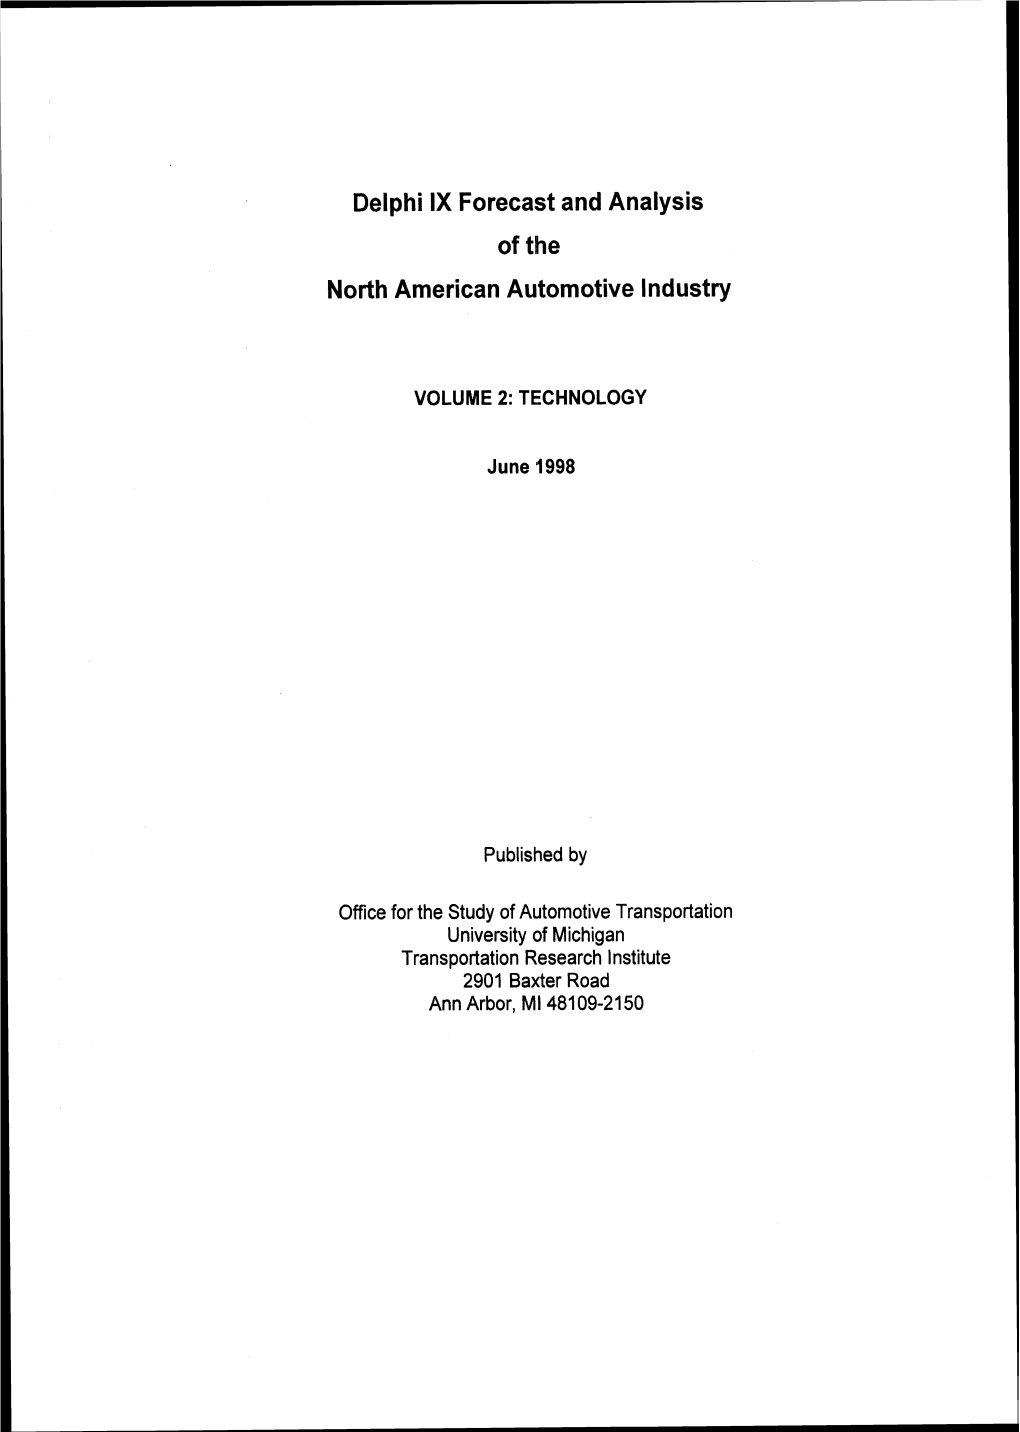 Delphi IX Forecast and Analysis of the North American Automotive Industry